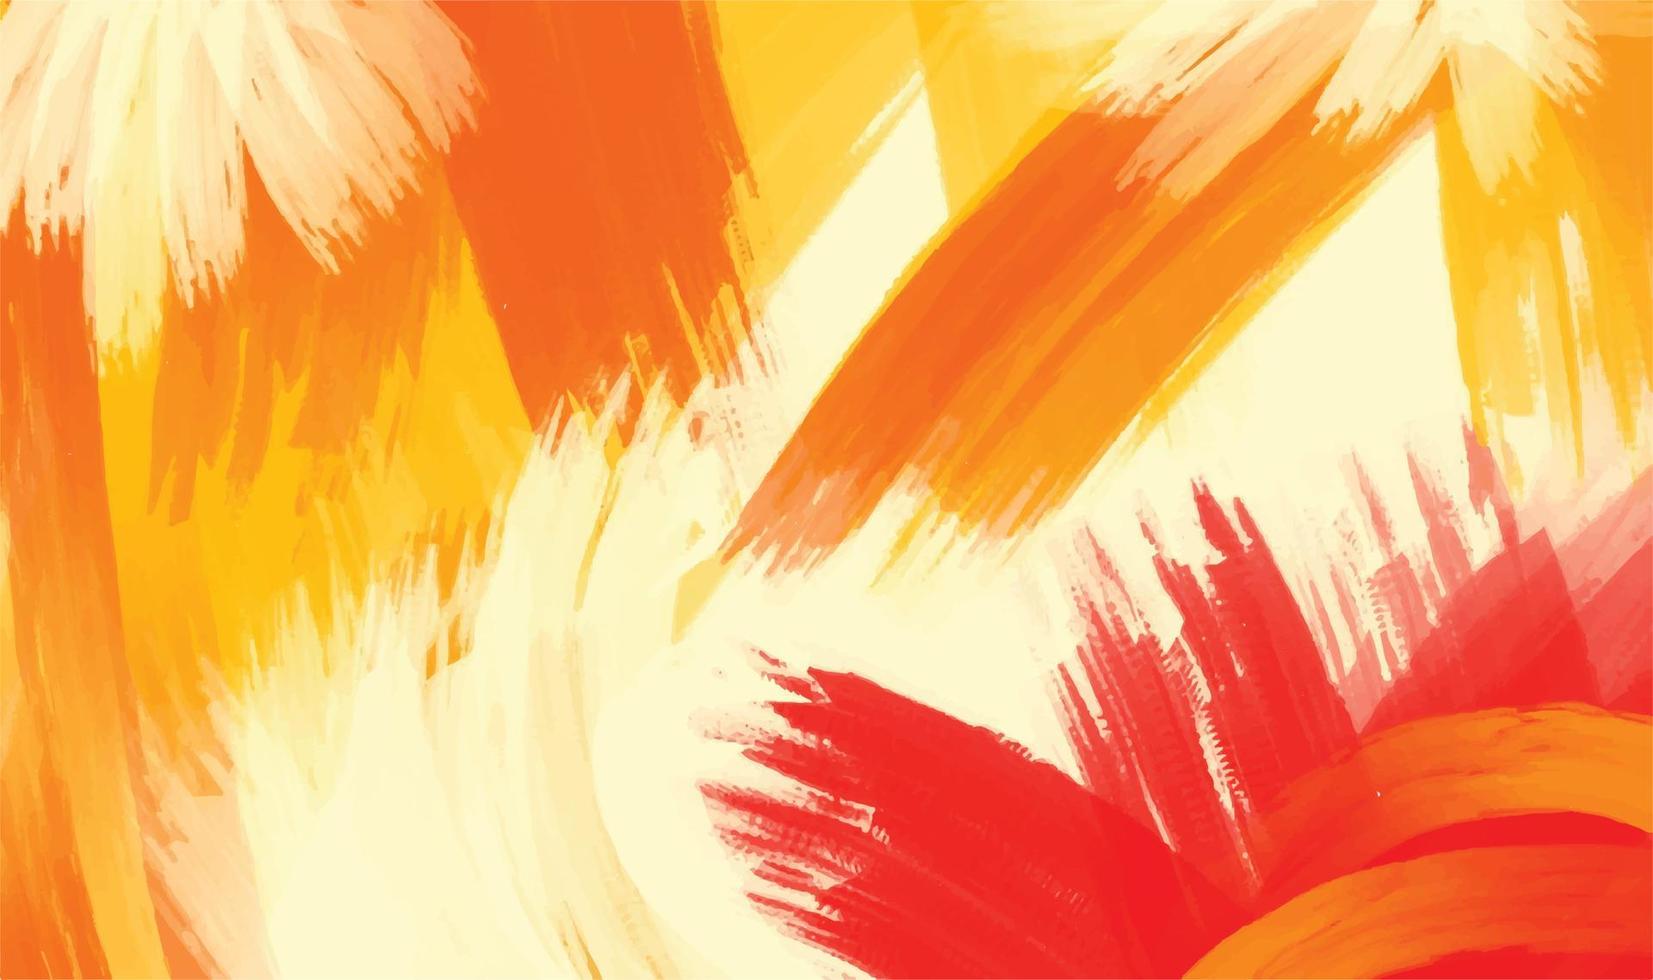 Red, orange, and yellow colored vector background with oil paint brush strokes texture. Wallpaper for banner, social media post, website, brochure, leaflet, and other purposes with autumn fall color.